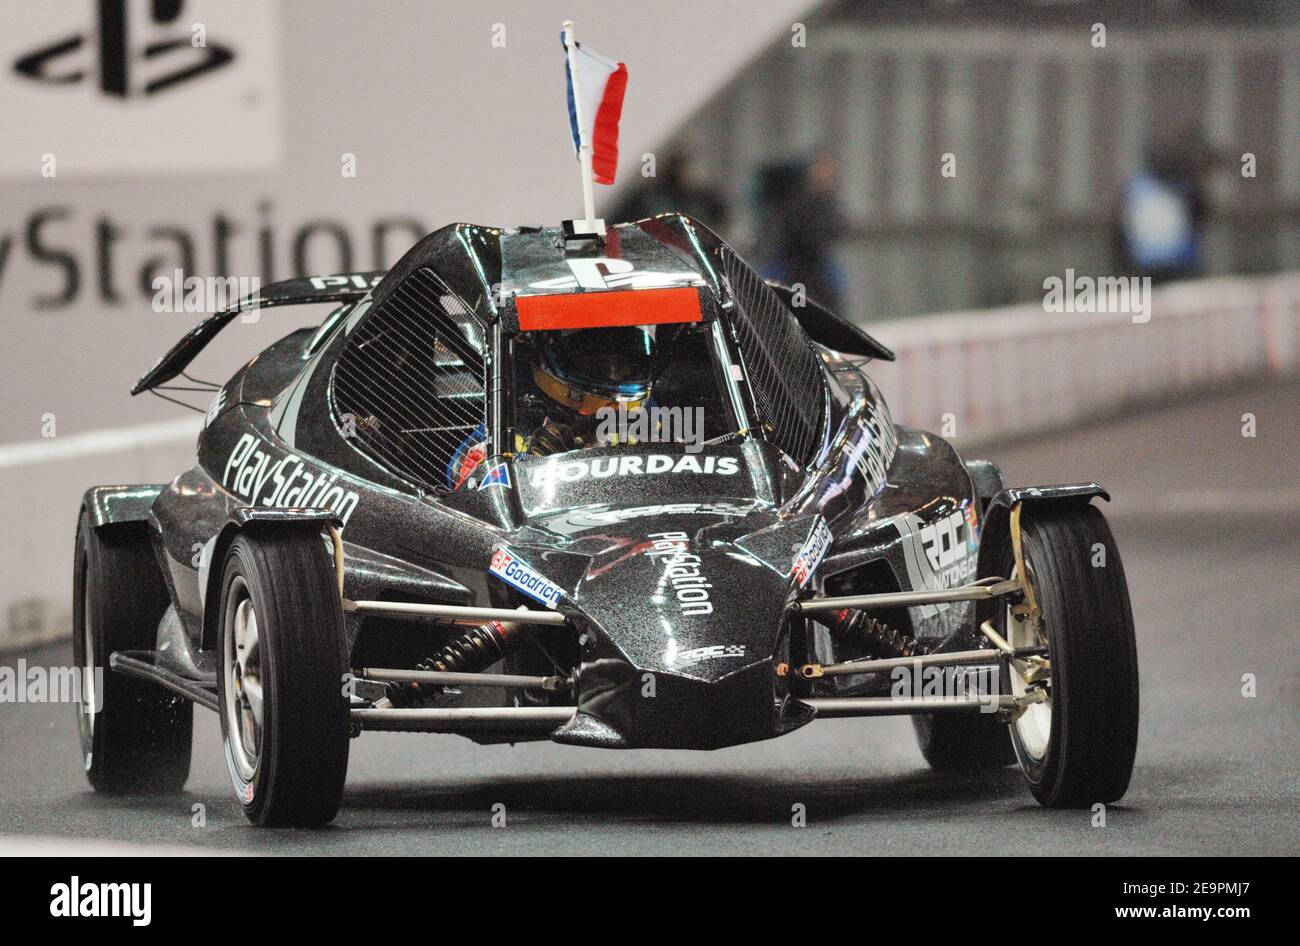 French driver Sebatien Bourdais races a buggy car during the 'Race of  Champions' held at the Stade de France in Saint-Denis, near Paris, France  on December 16, 2006. Photo by Nicolas Khayat/Cameleon/ABACAPRESS.COM